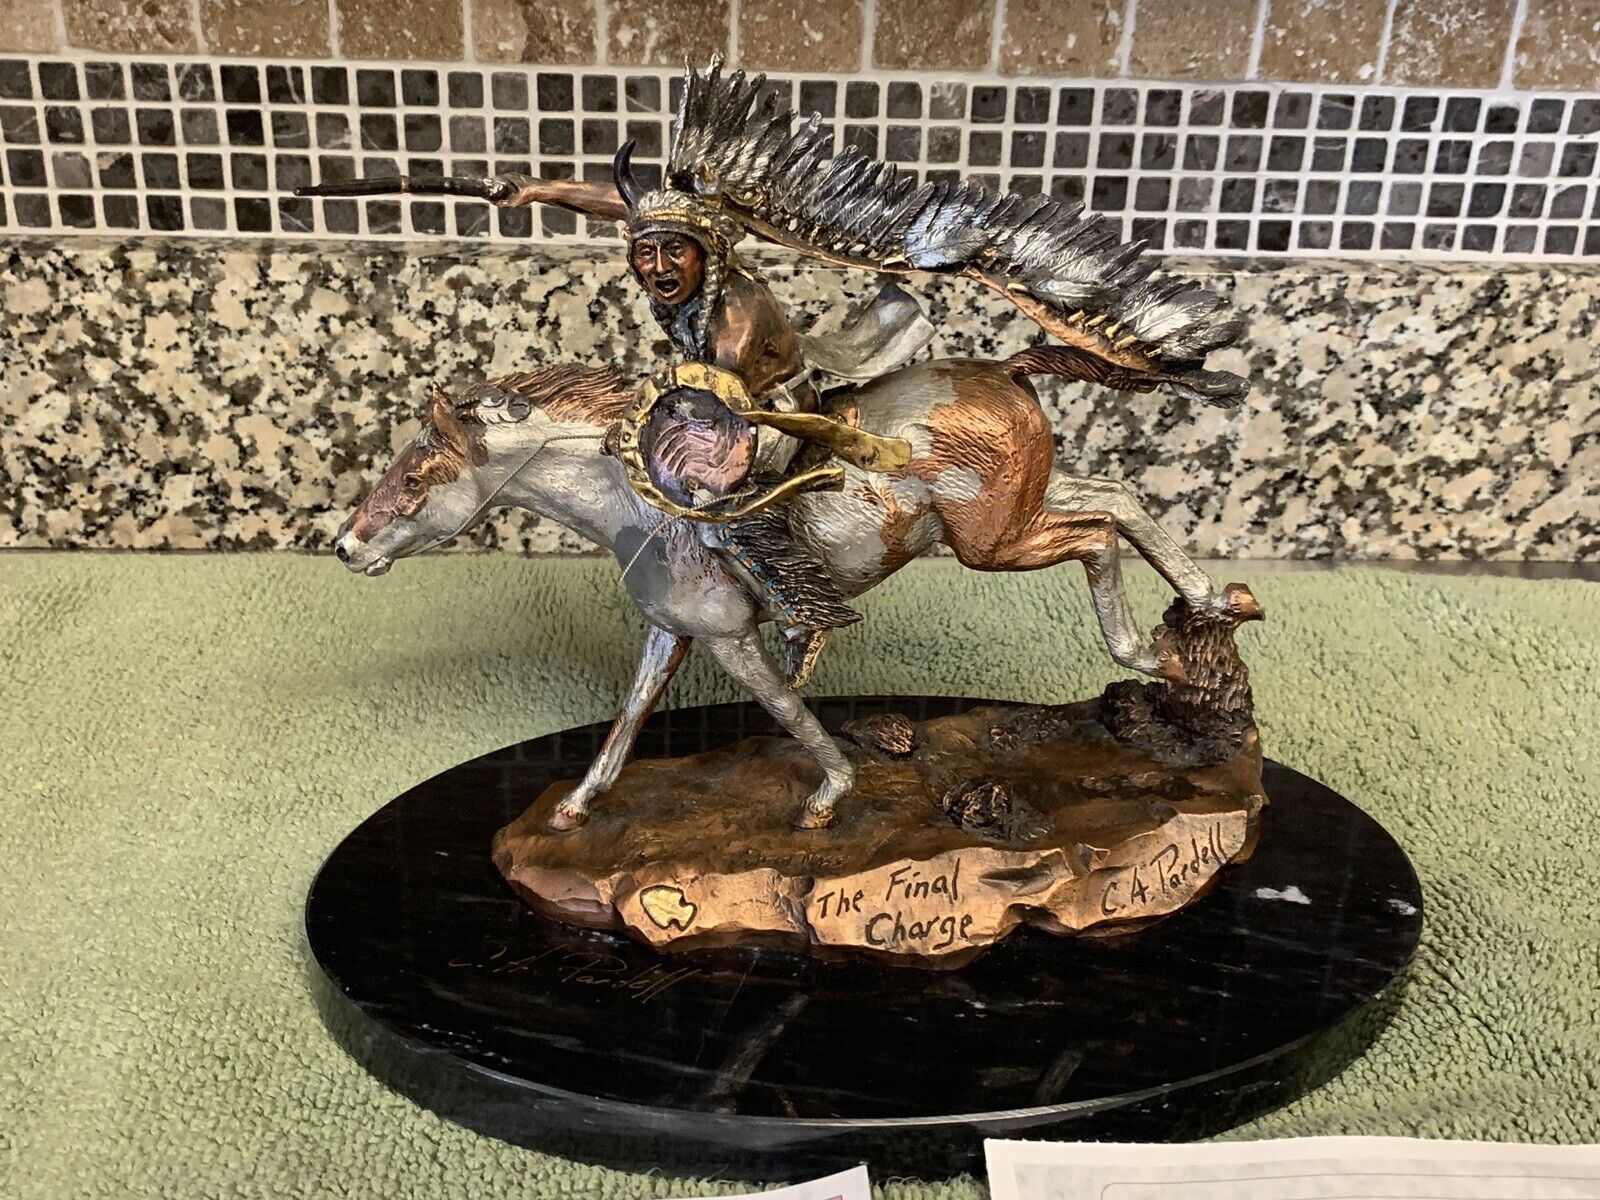 The Legend’s The Final Charge Sculpture Mixed Media  ,C.A.PARDELL 1991 246/750